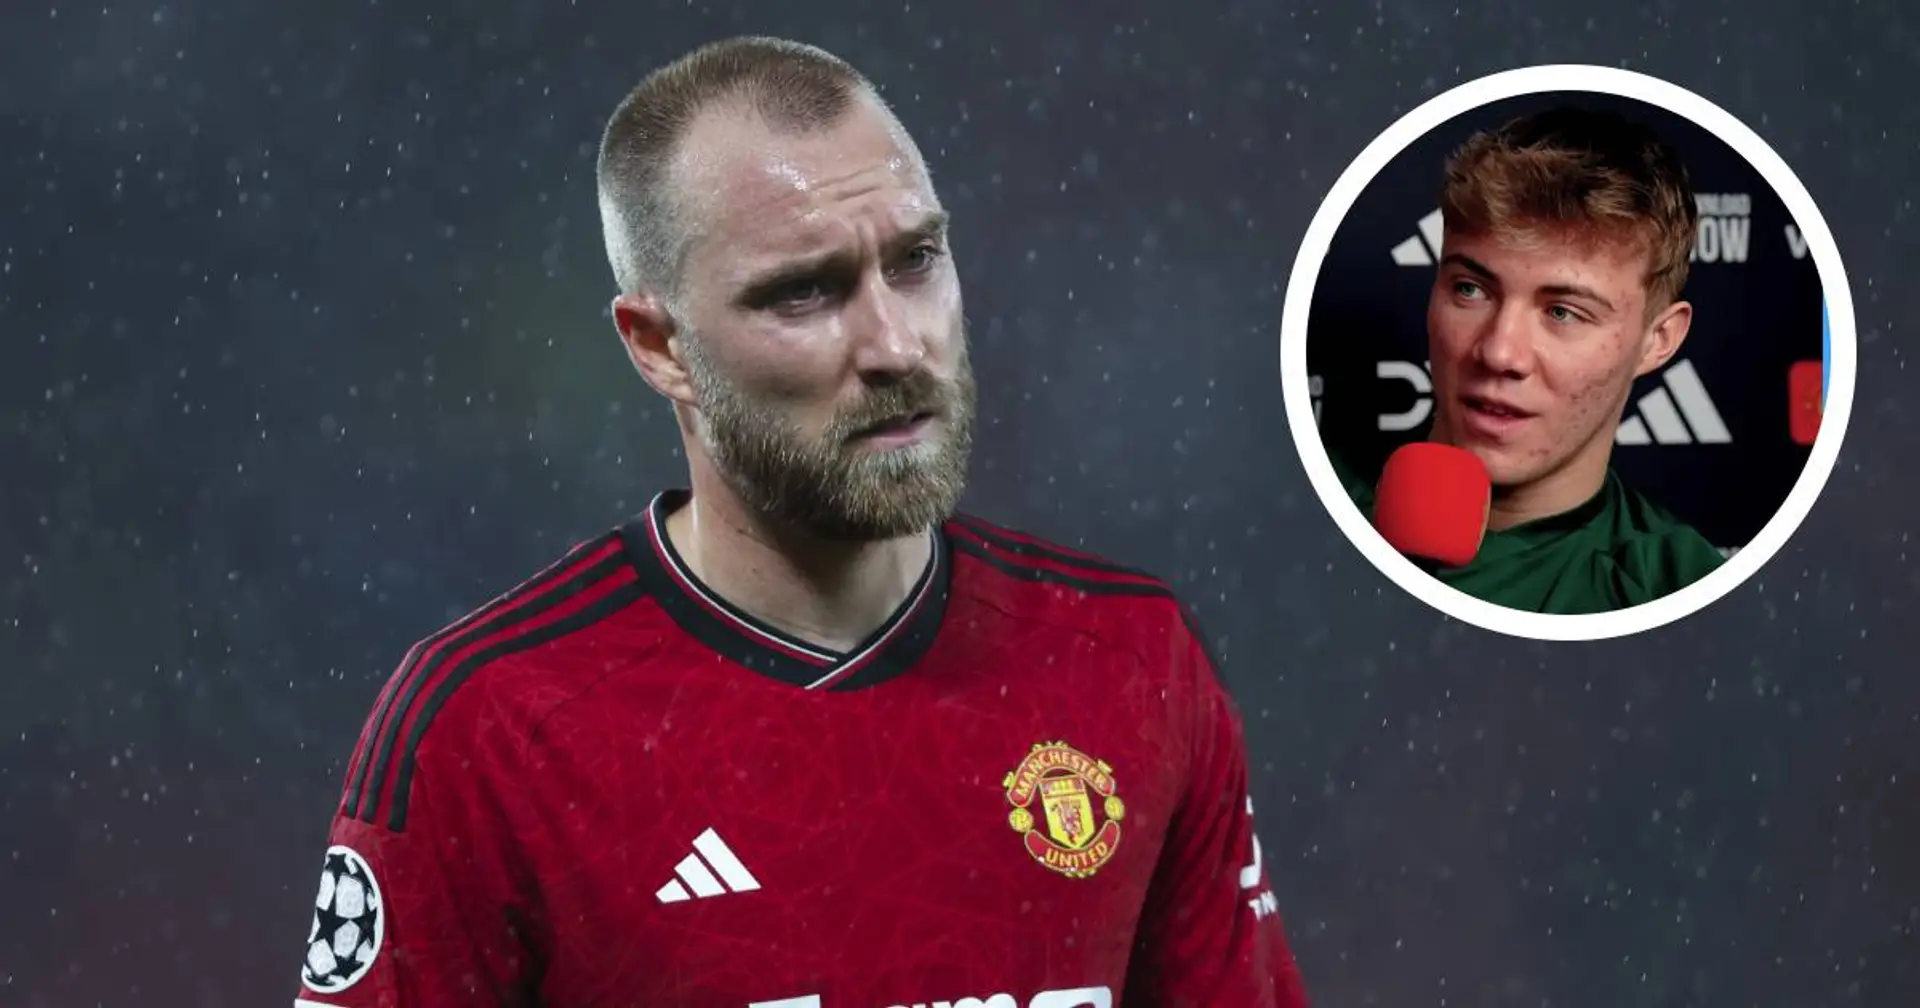 'I know what it's like': Rasmus Hojlund responds to Christian Eriksen claiming he's unhappy at Man United